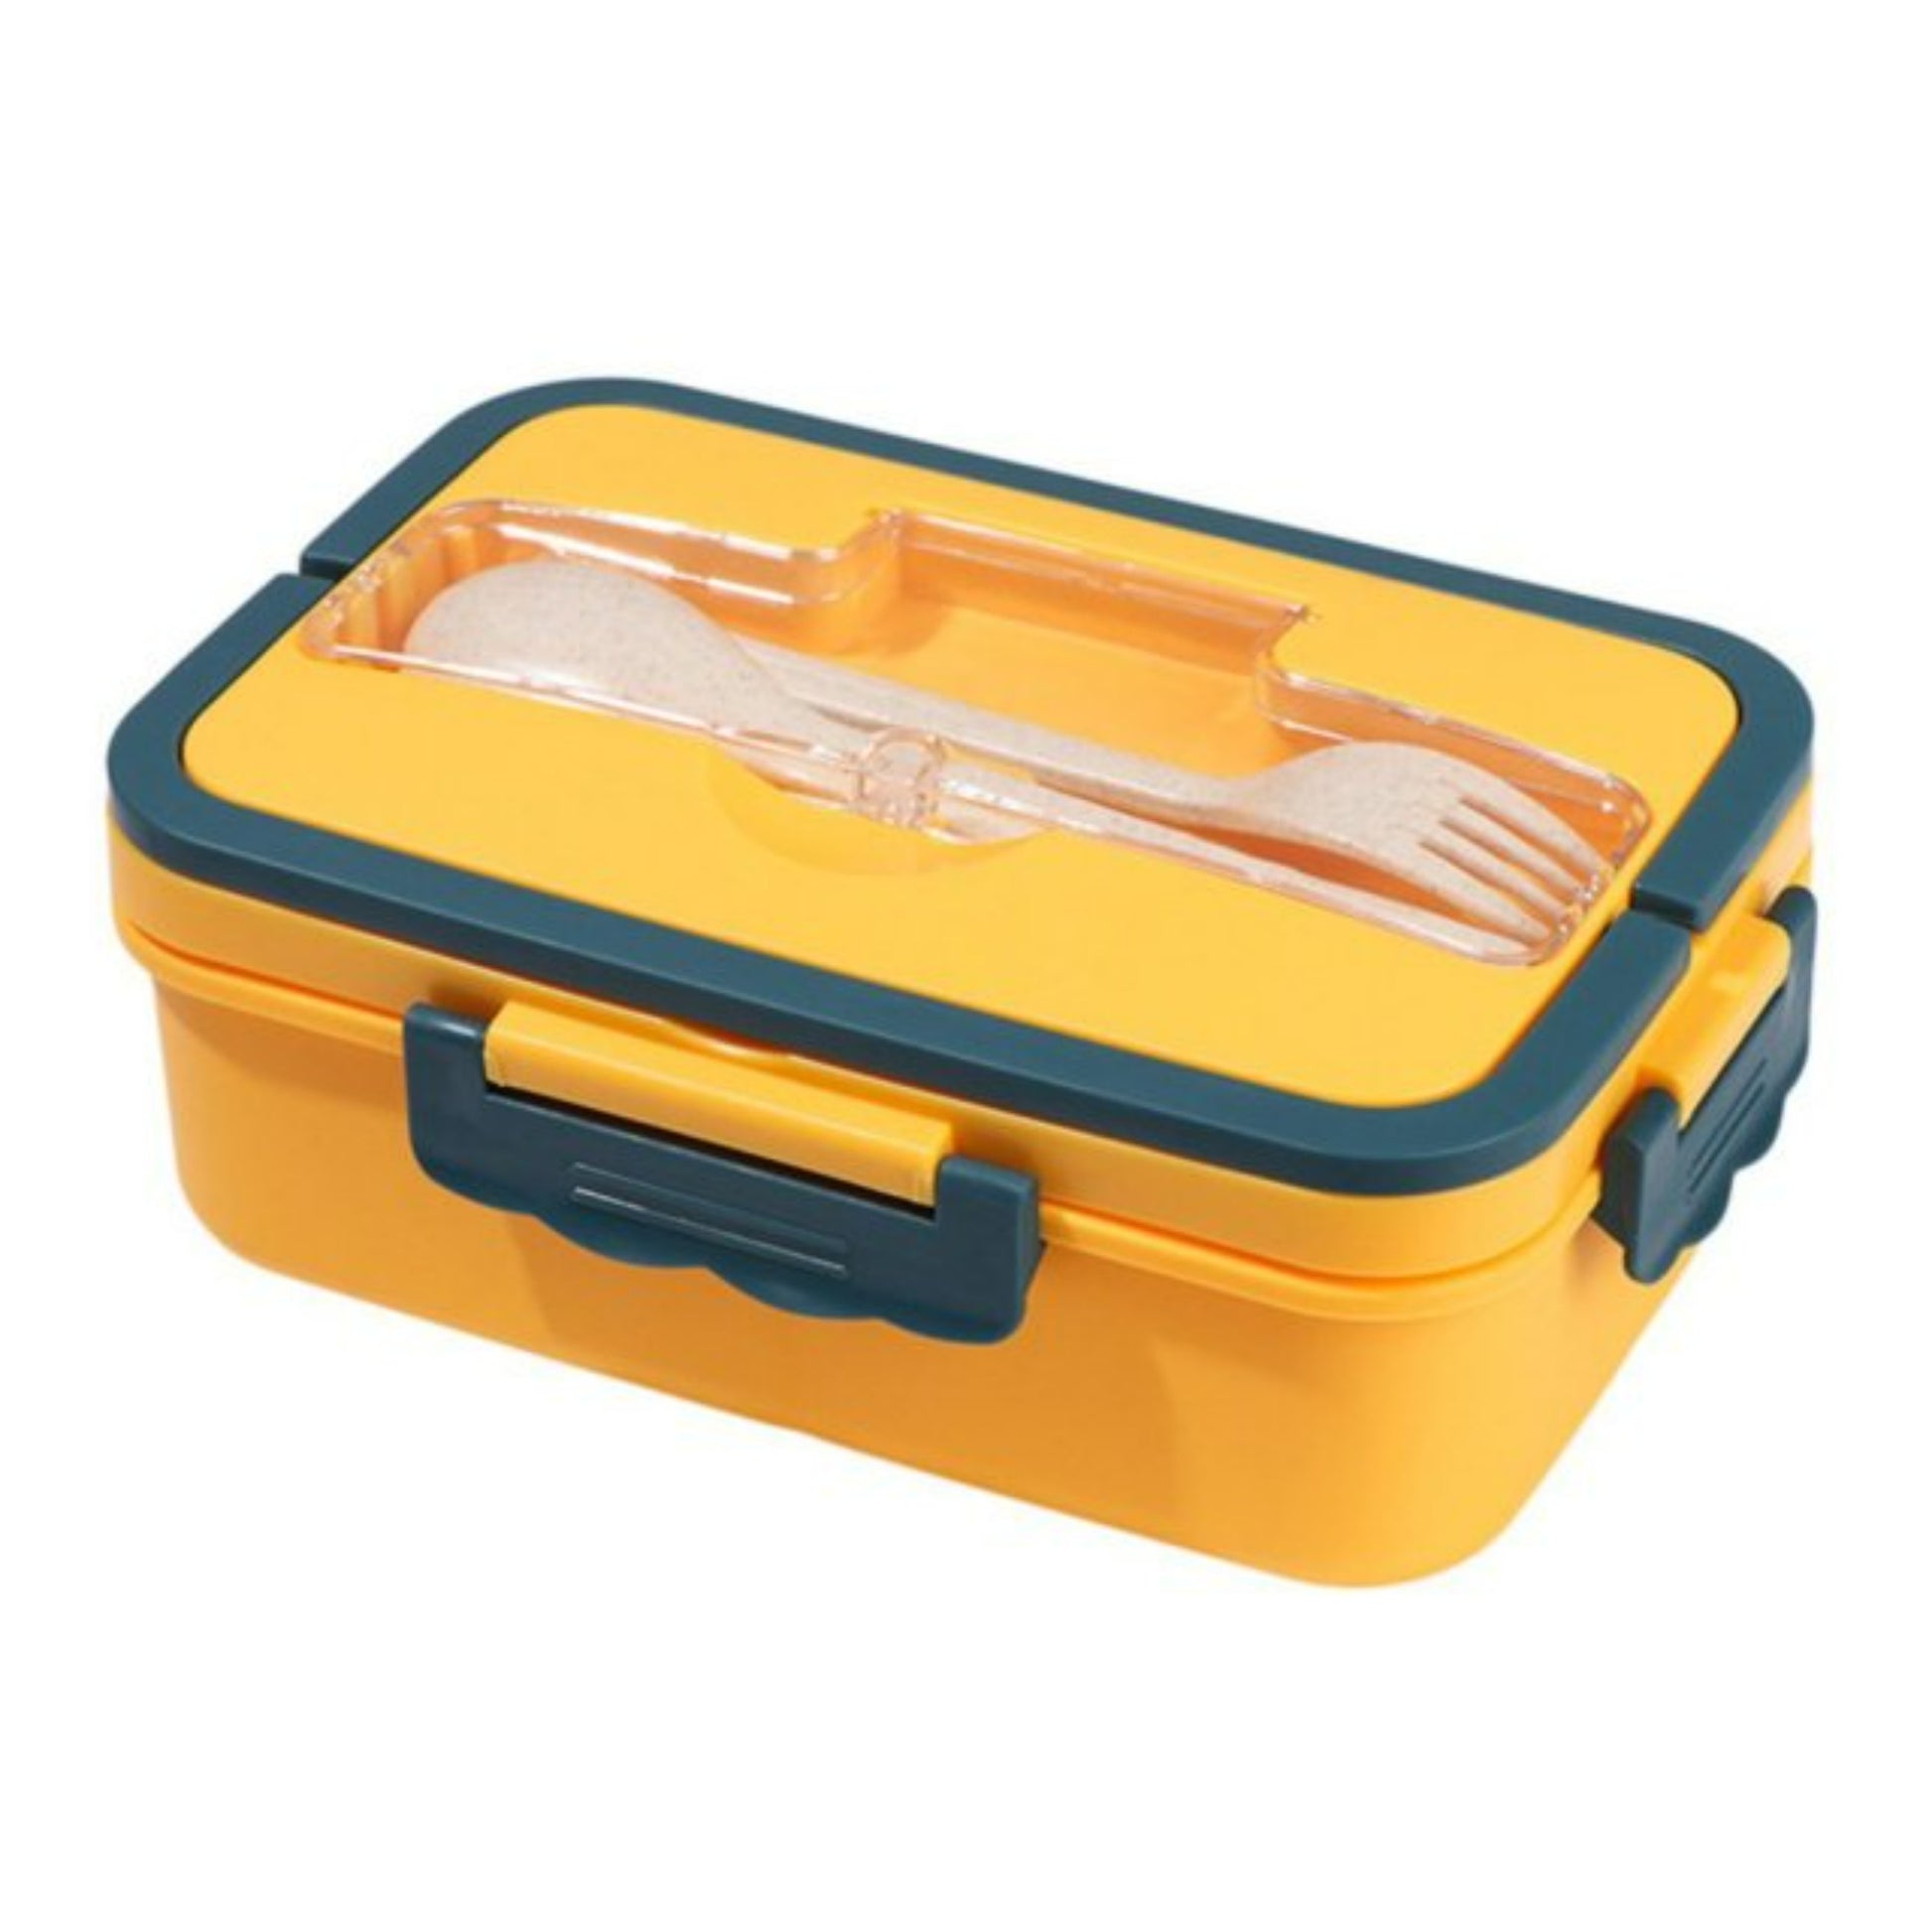 https://allabundantthings.com/cdn/shop/products/Wheat-Straw-With-A-Fork-And-Spoon-Student-Compartment-Lunch-Box-Can-Microwave-Lunch-Fresh-keeping.jpg_640x640_0ede3eee-23b1-4d48-9dfe-27a890c1f4ae.jpg?v=1646433848&width=1946